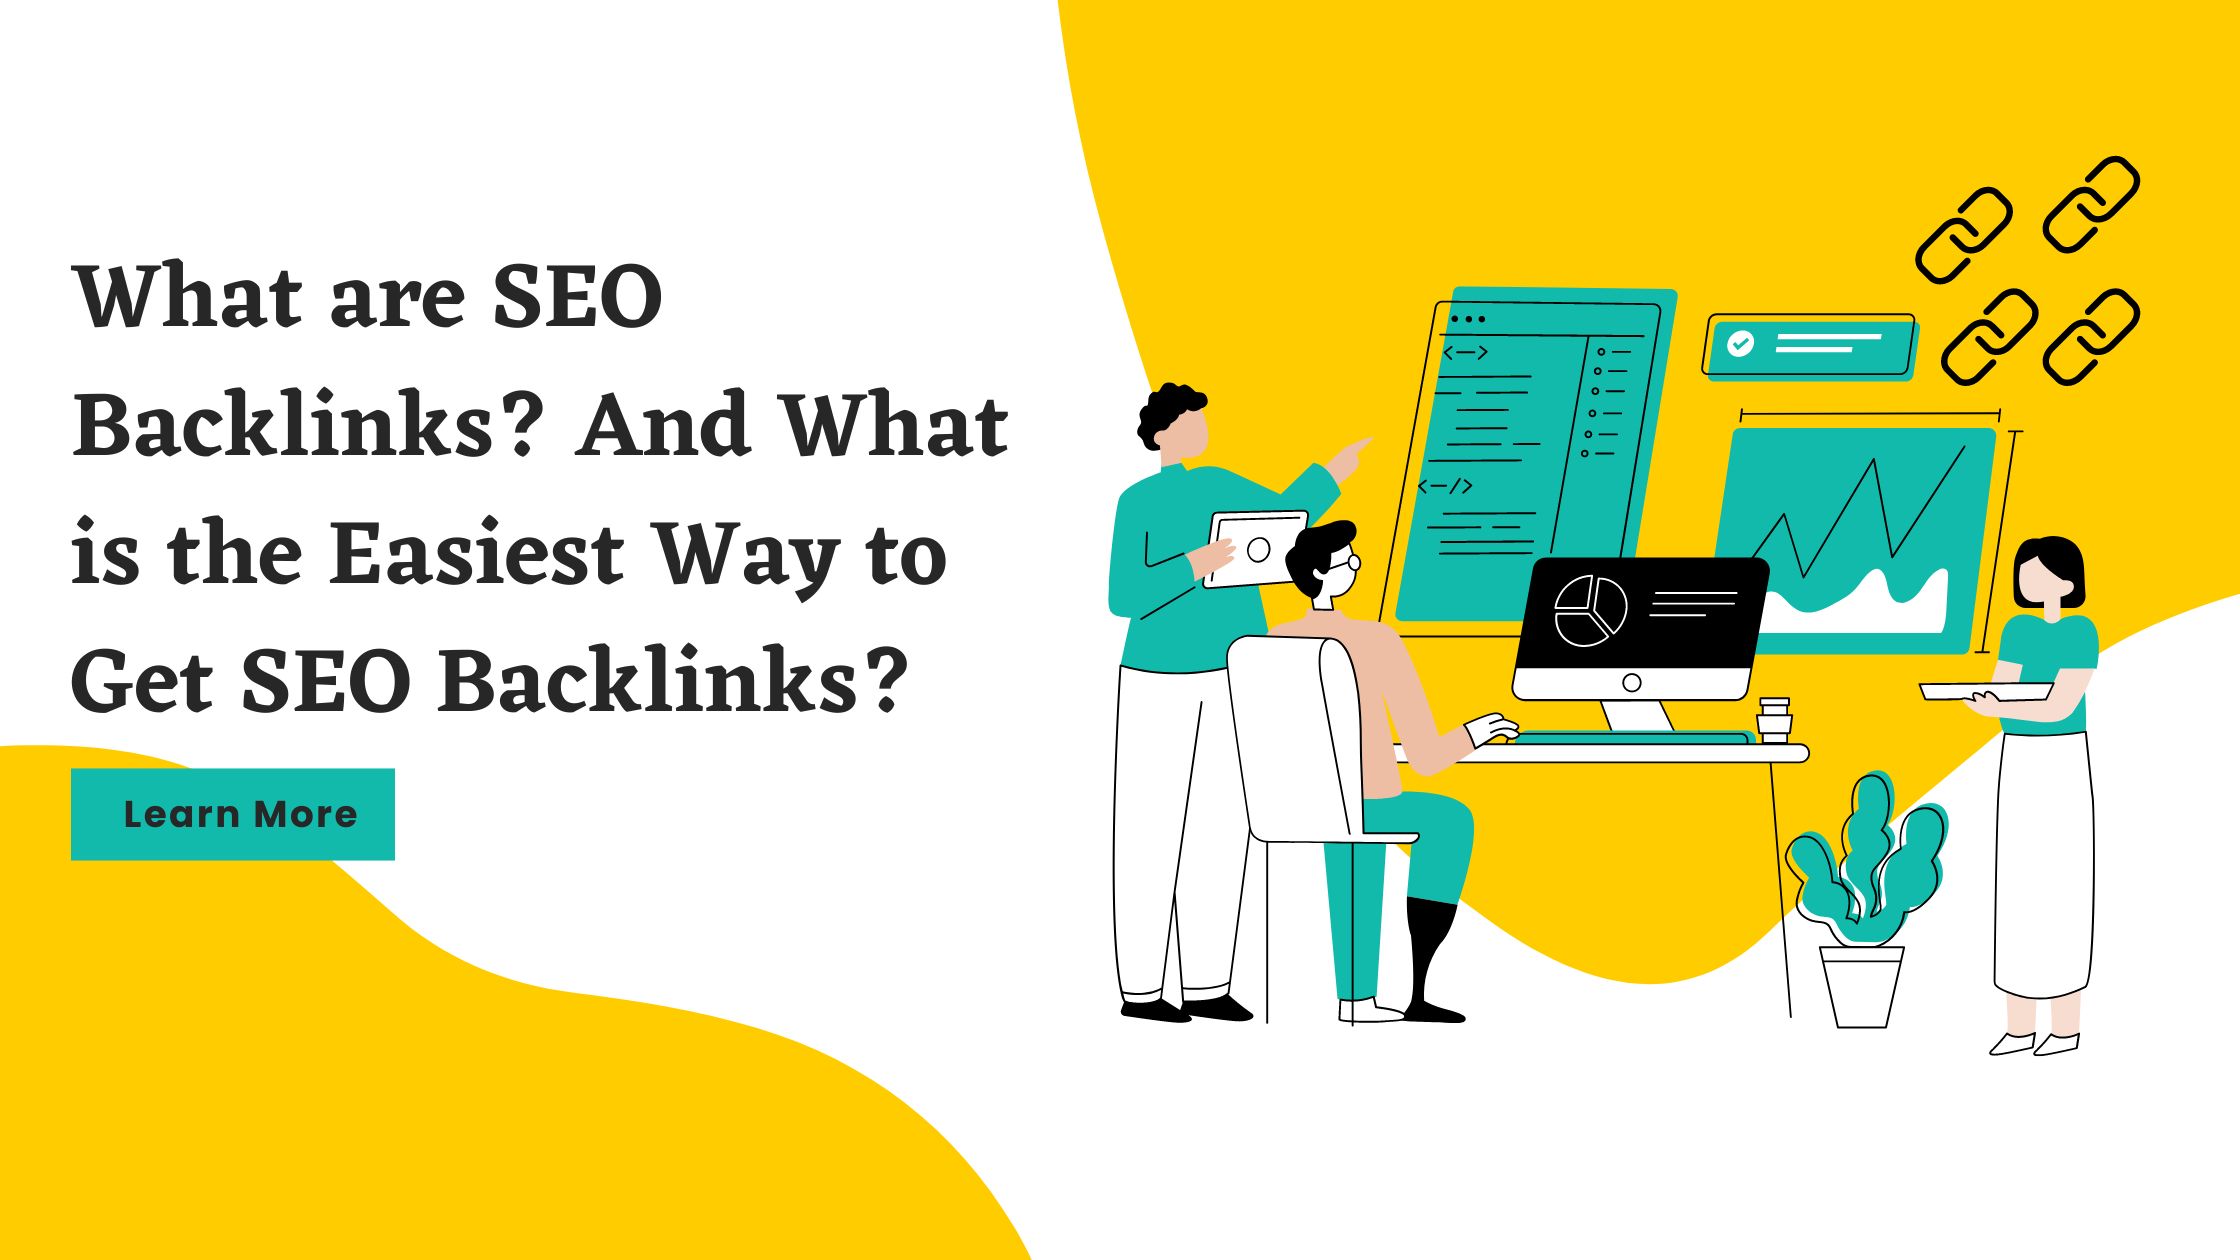 What are SEO Backlinks? And What is the Easiest Way to Get SEO Backlinks?